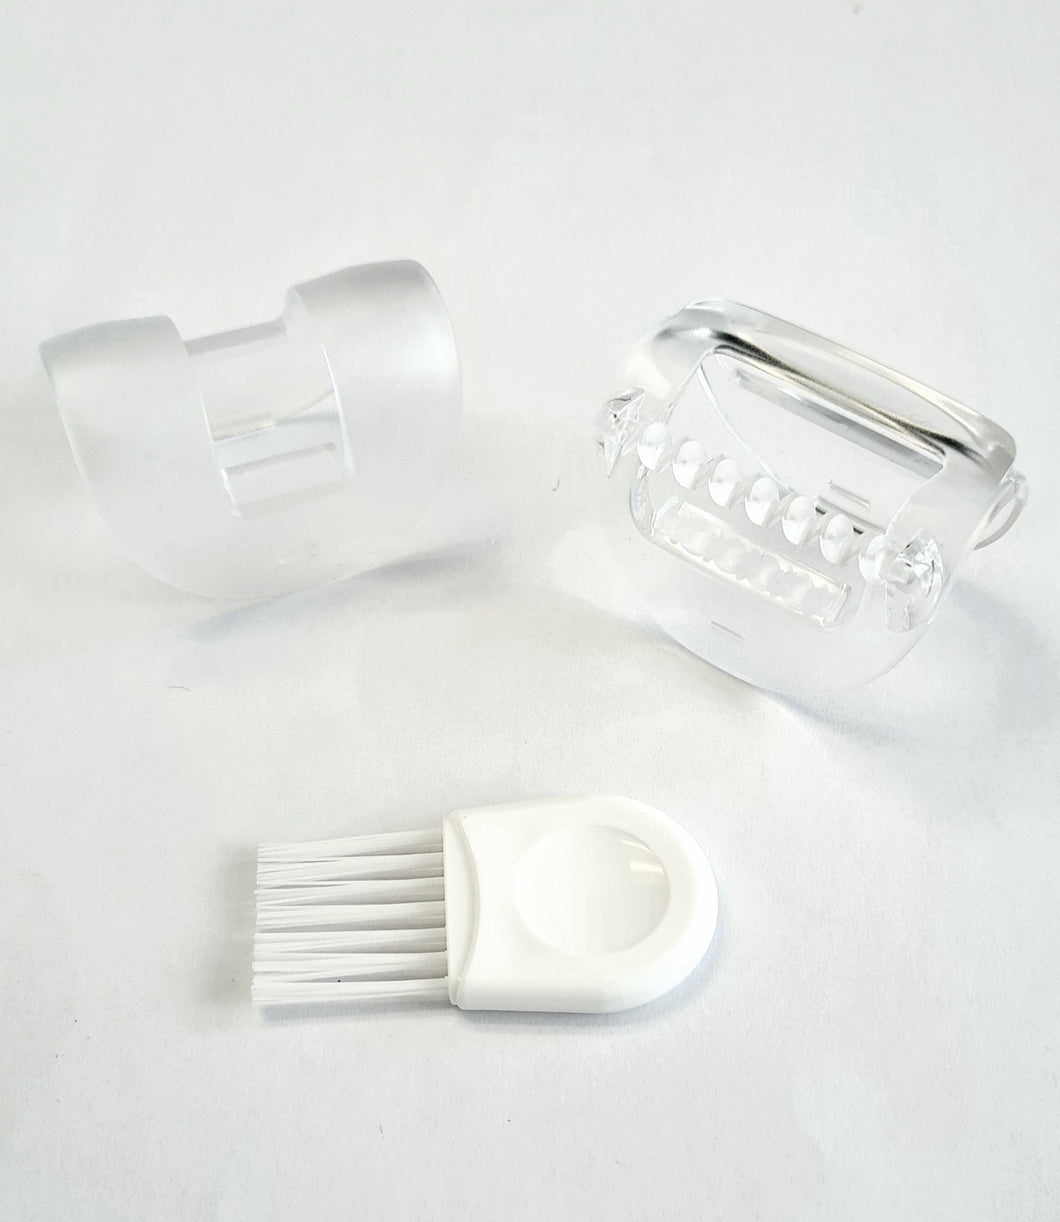 Philips Spare Caps and cleaning brush for Satinelle Essential Epilator BRE255/00 - Get a Cut NZ